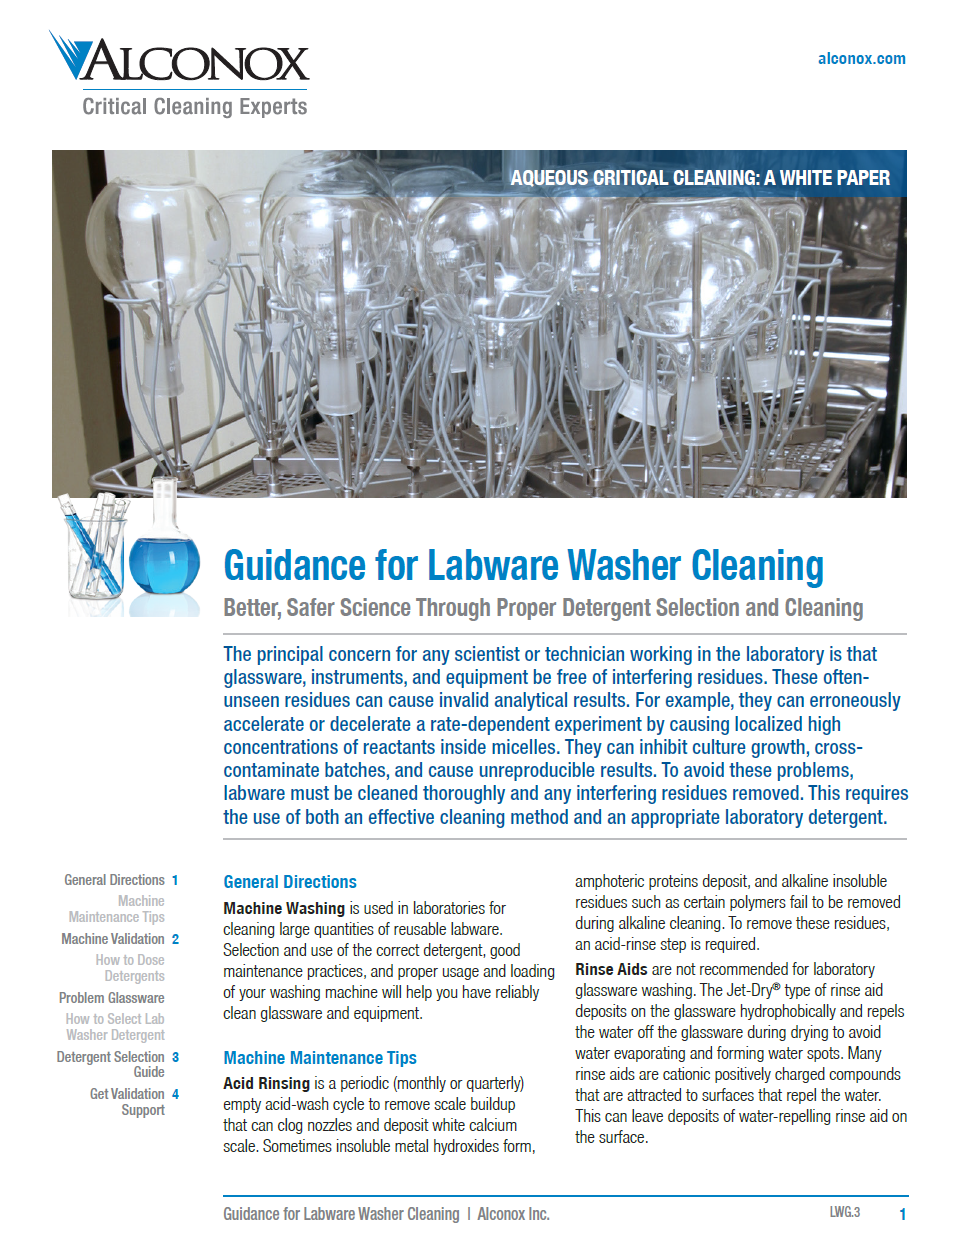 Guide to Laboratory Cleaning